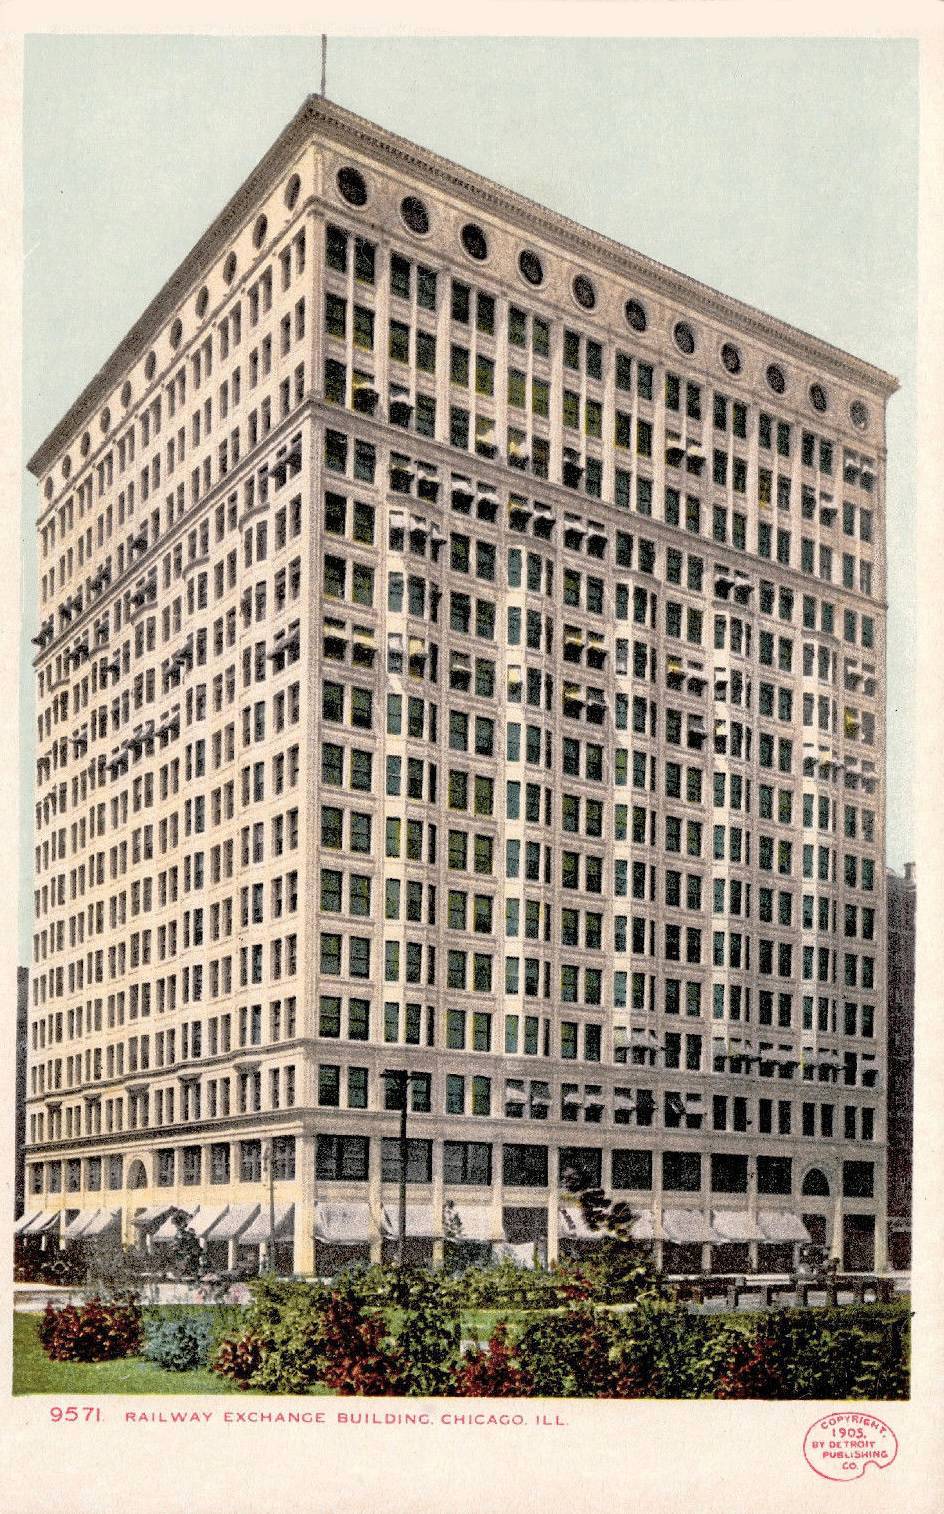 A POSTCARD - CHICAGO - THE RAILWAY EXCHANGE BUILDING - MICHIGAN AVE - NOTE THE AWNINGS - 1905